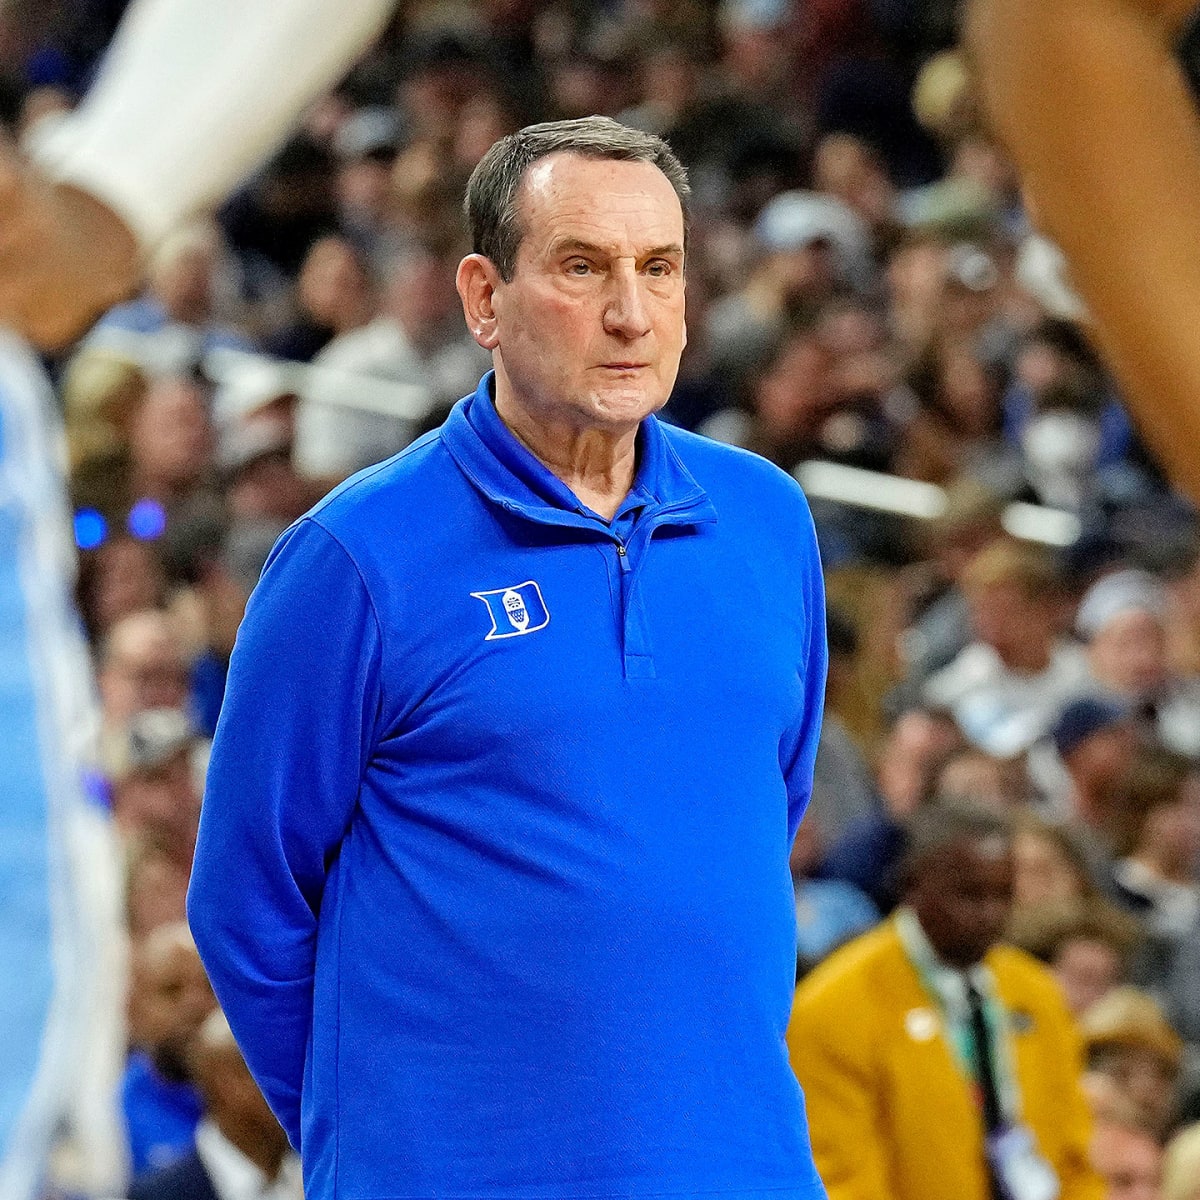 Coach K sees destiny denied as Duke loss sends him to retirement - Sports  Illustrated